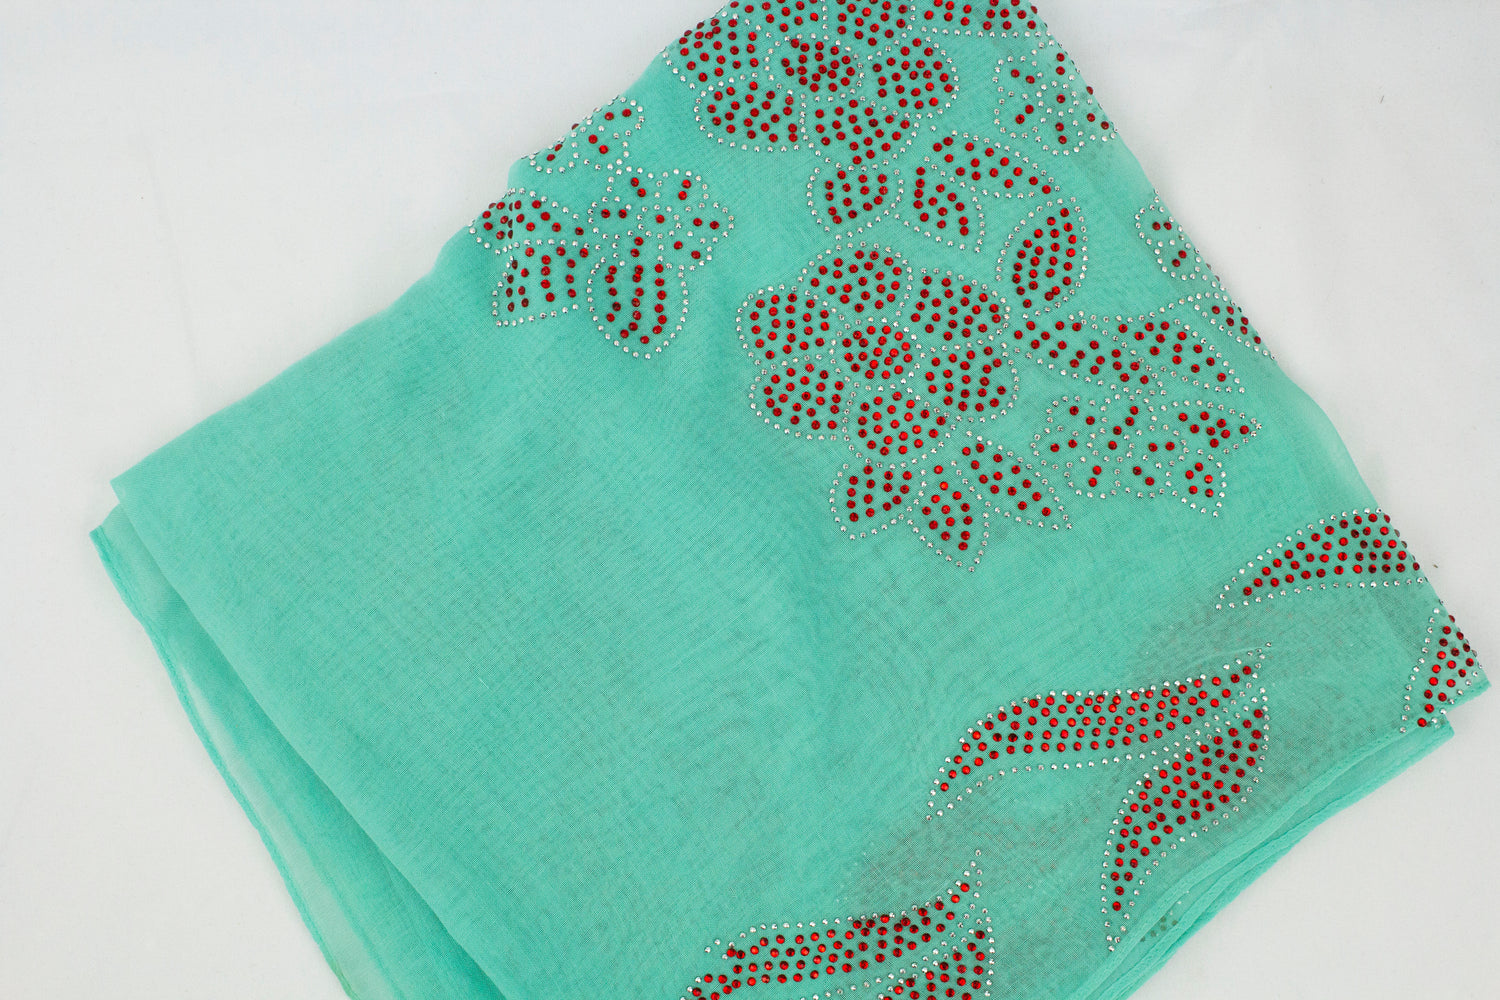 teal square hijab with red jewels in a floral pattern